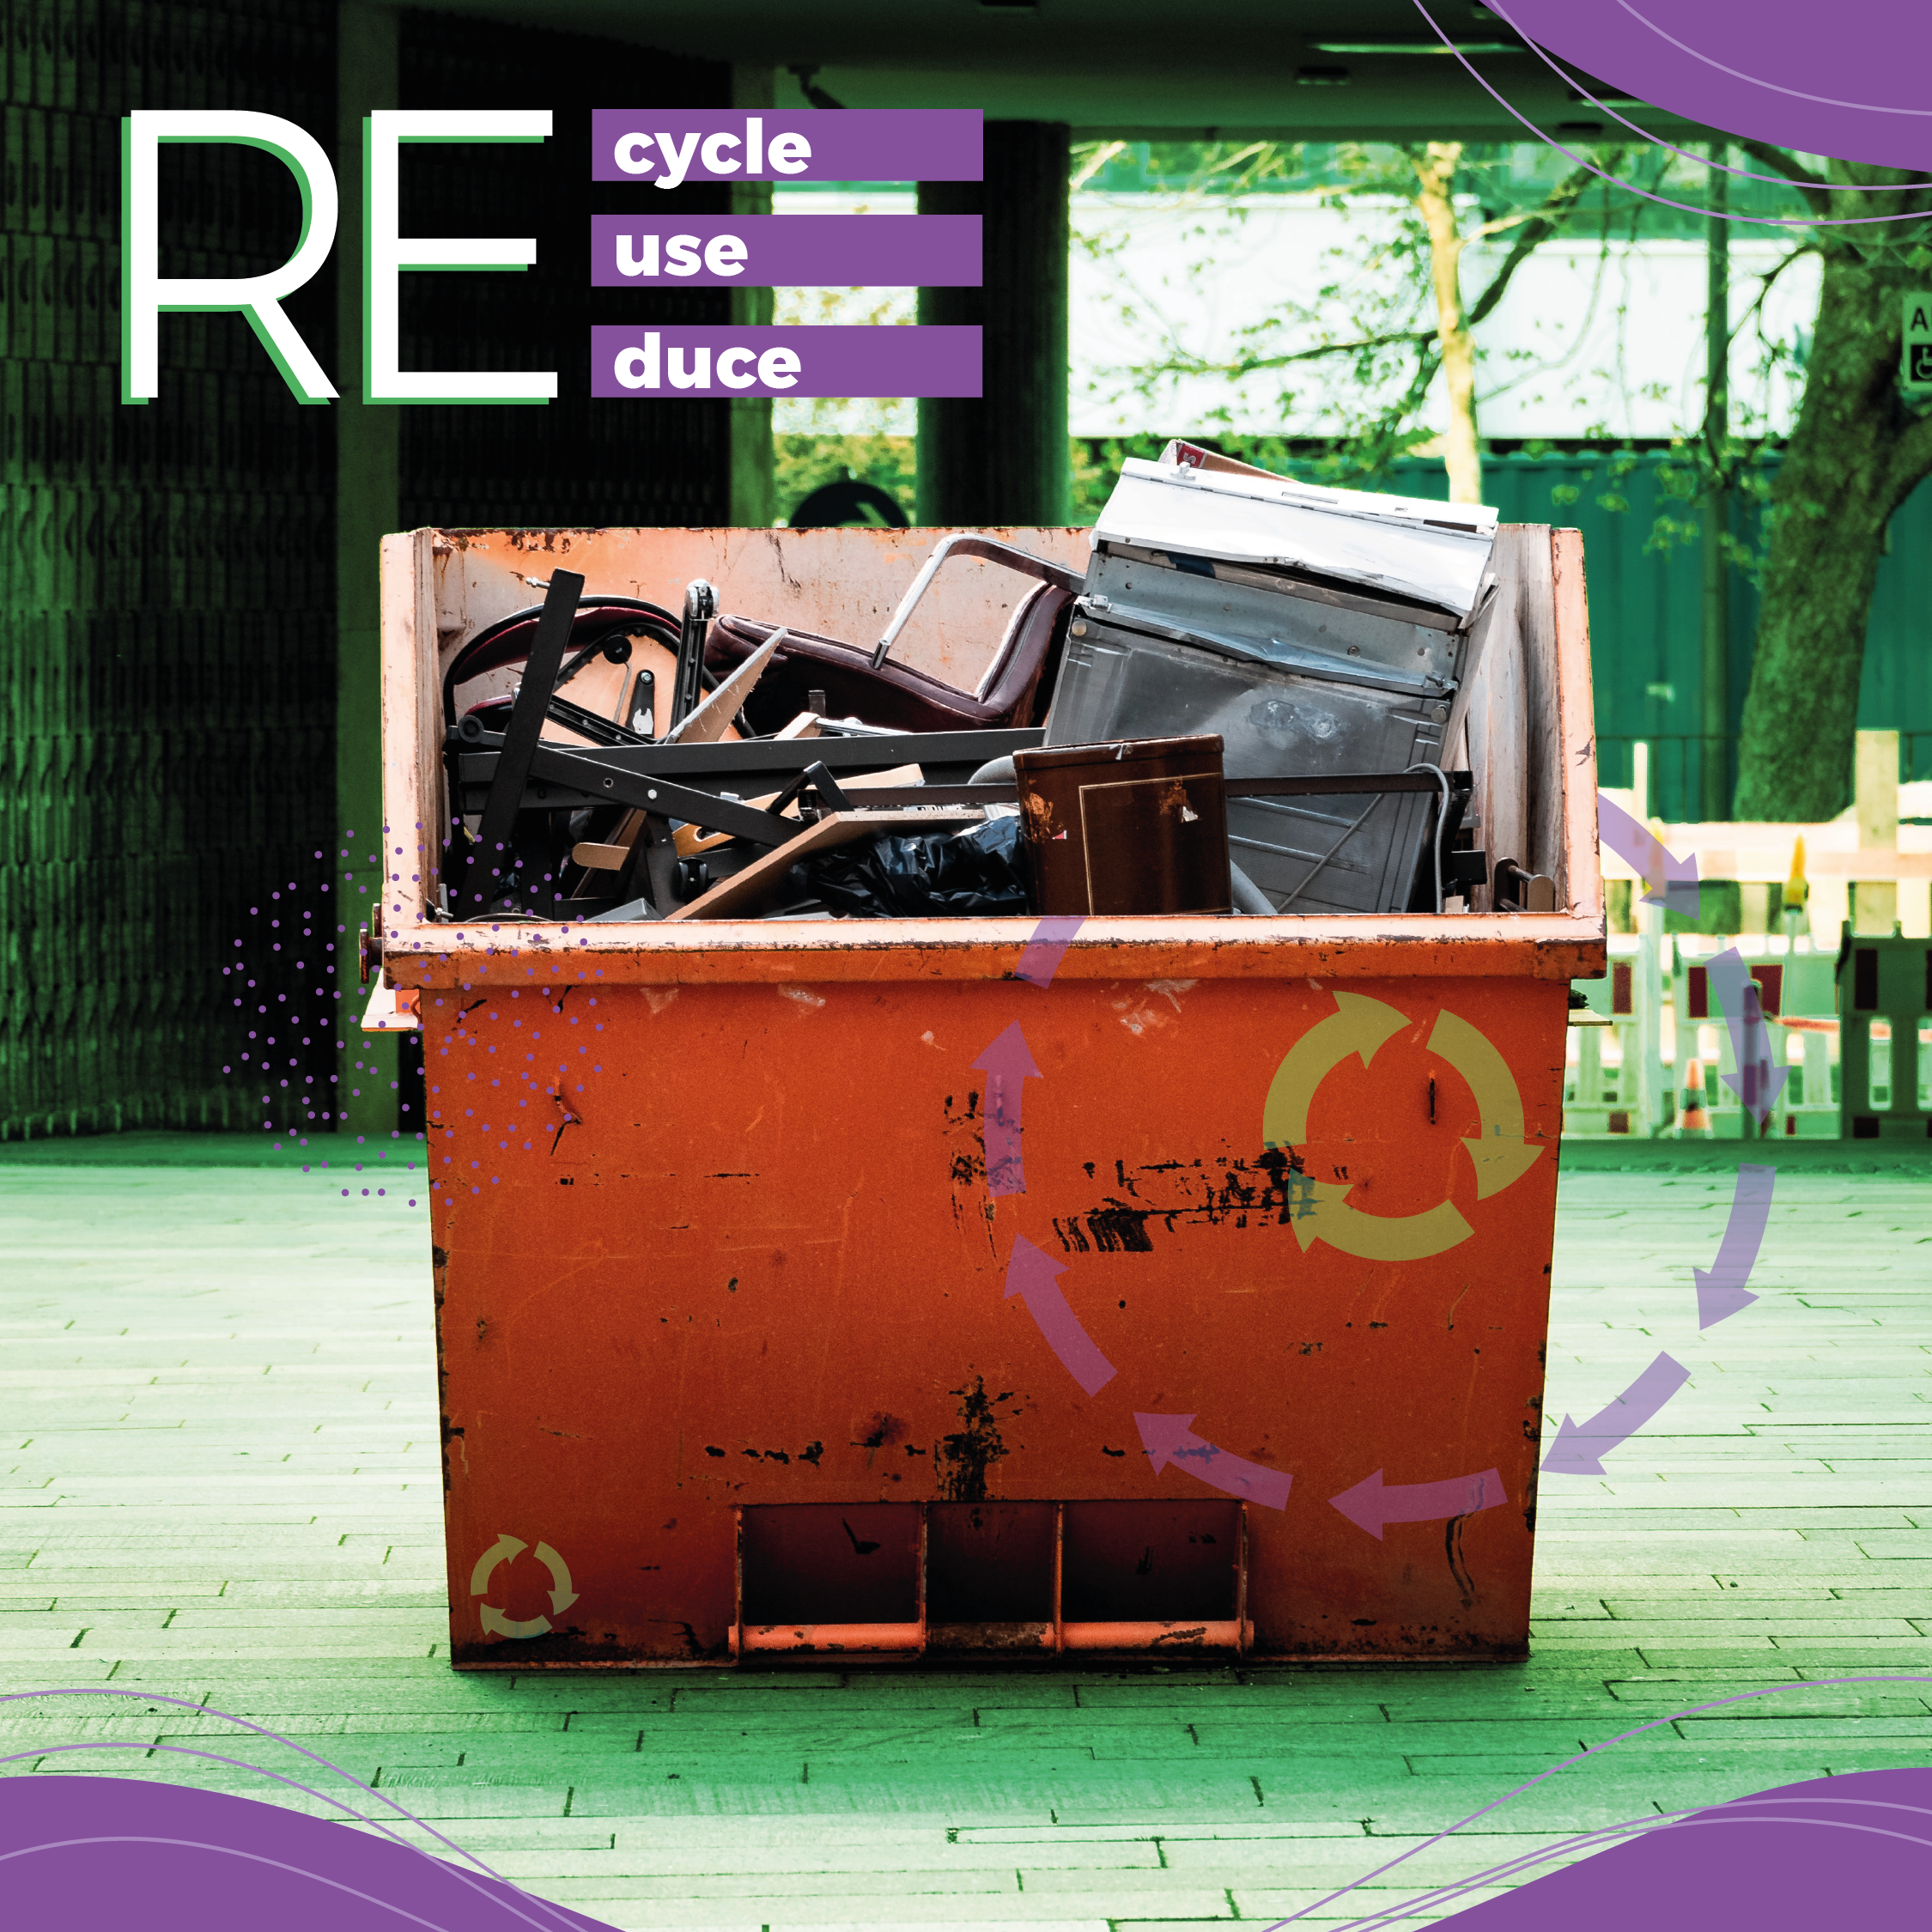 Creative Do It yourself Projects - Re-Use - Renovate - Recycle